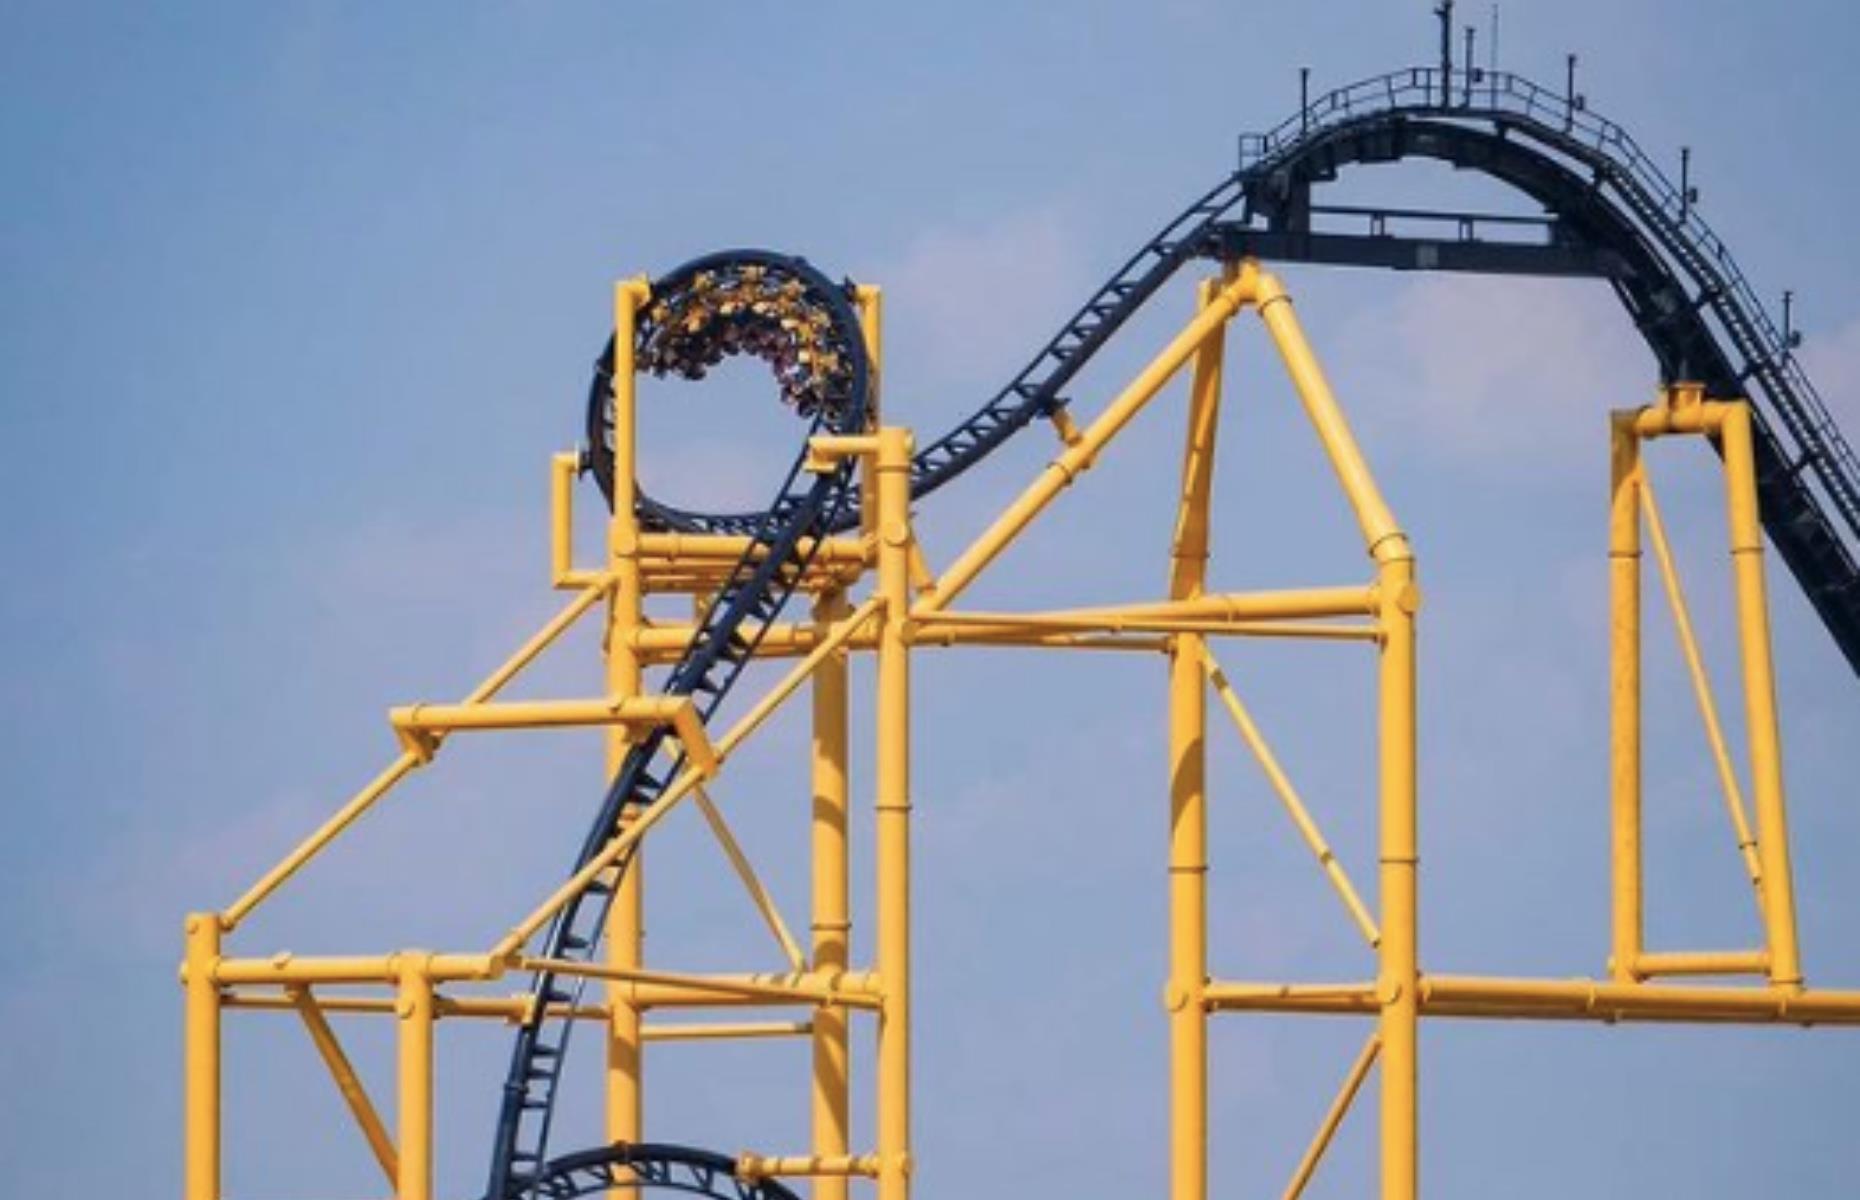 <p>The Steel Curtain sits perched on a hill, towering over Kennywood Park, and can be seen for miles around. From a distance, it looks like a strange monolith of steel, but as you get closer, you start to see the track with its loops, drops, and record-breaking nine inversions.</p>  <p>It is the only roller coaster in the world to be named after an American football team – well, the defensive line of the Pittsburgh Steelers from the 1970s, who were so feared their defensive line was nicknamed the Steel Curtain.</p>